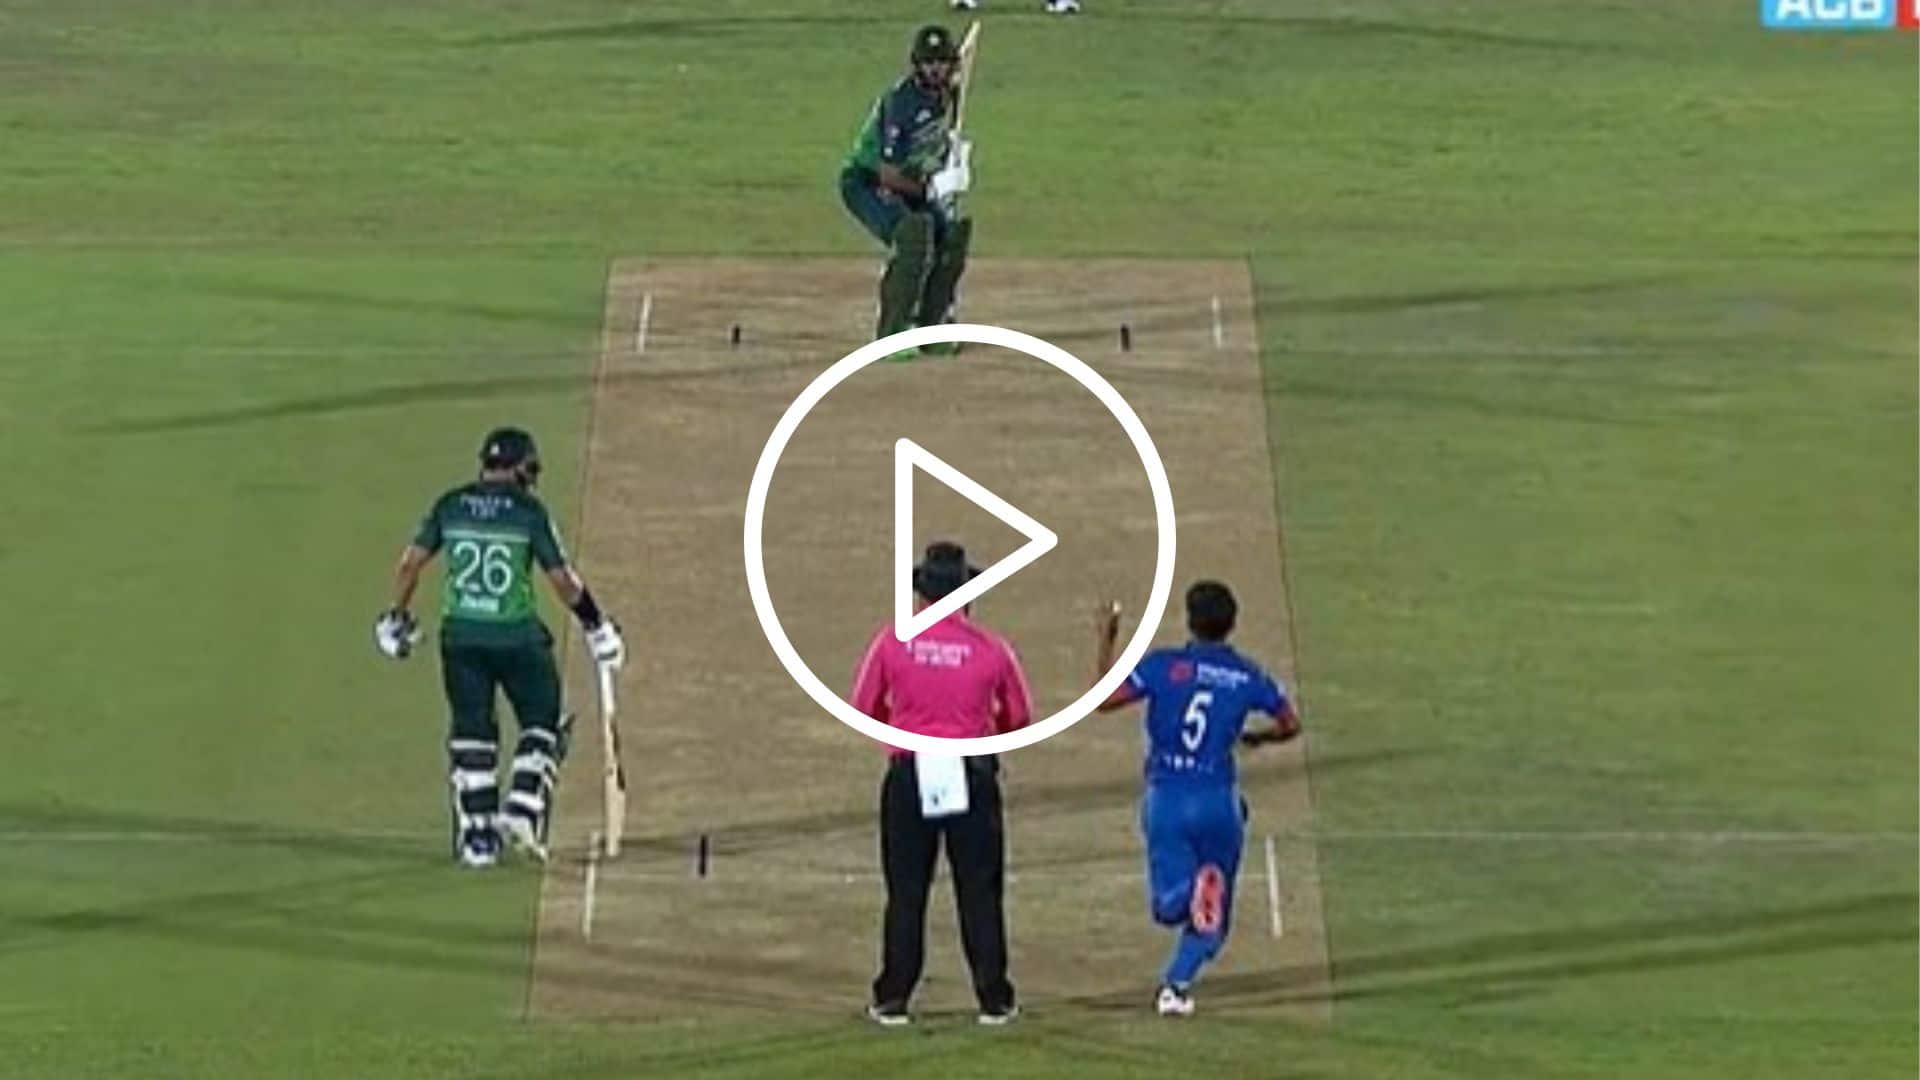 [Watch] Fazalhaq Farooqi Cleans Up Fakhar Zaman With A Killer Delivery